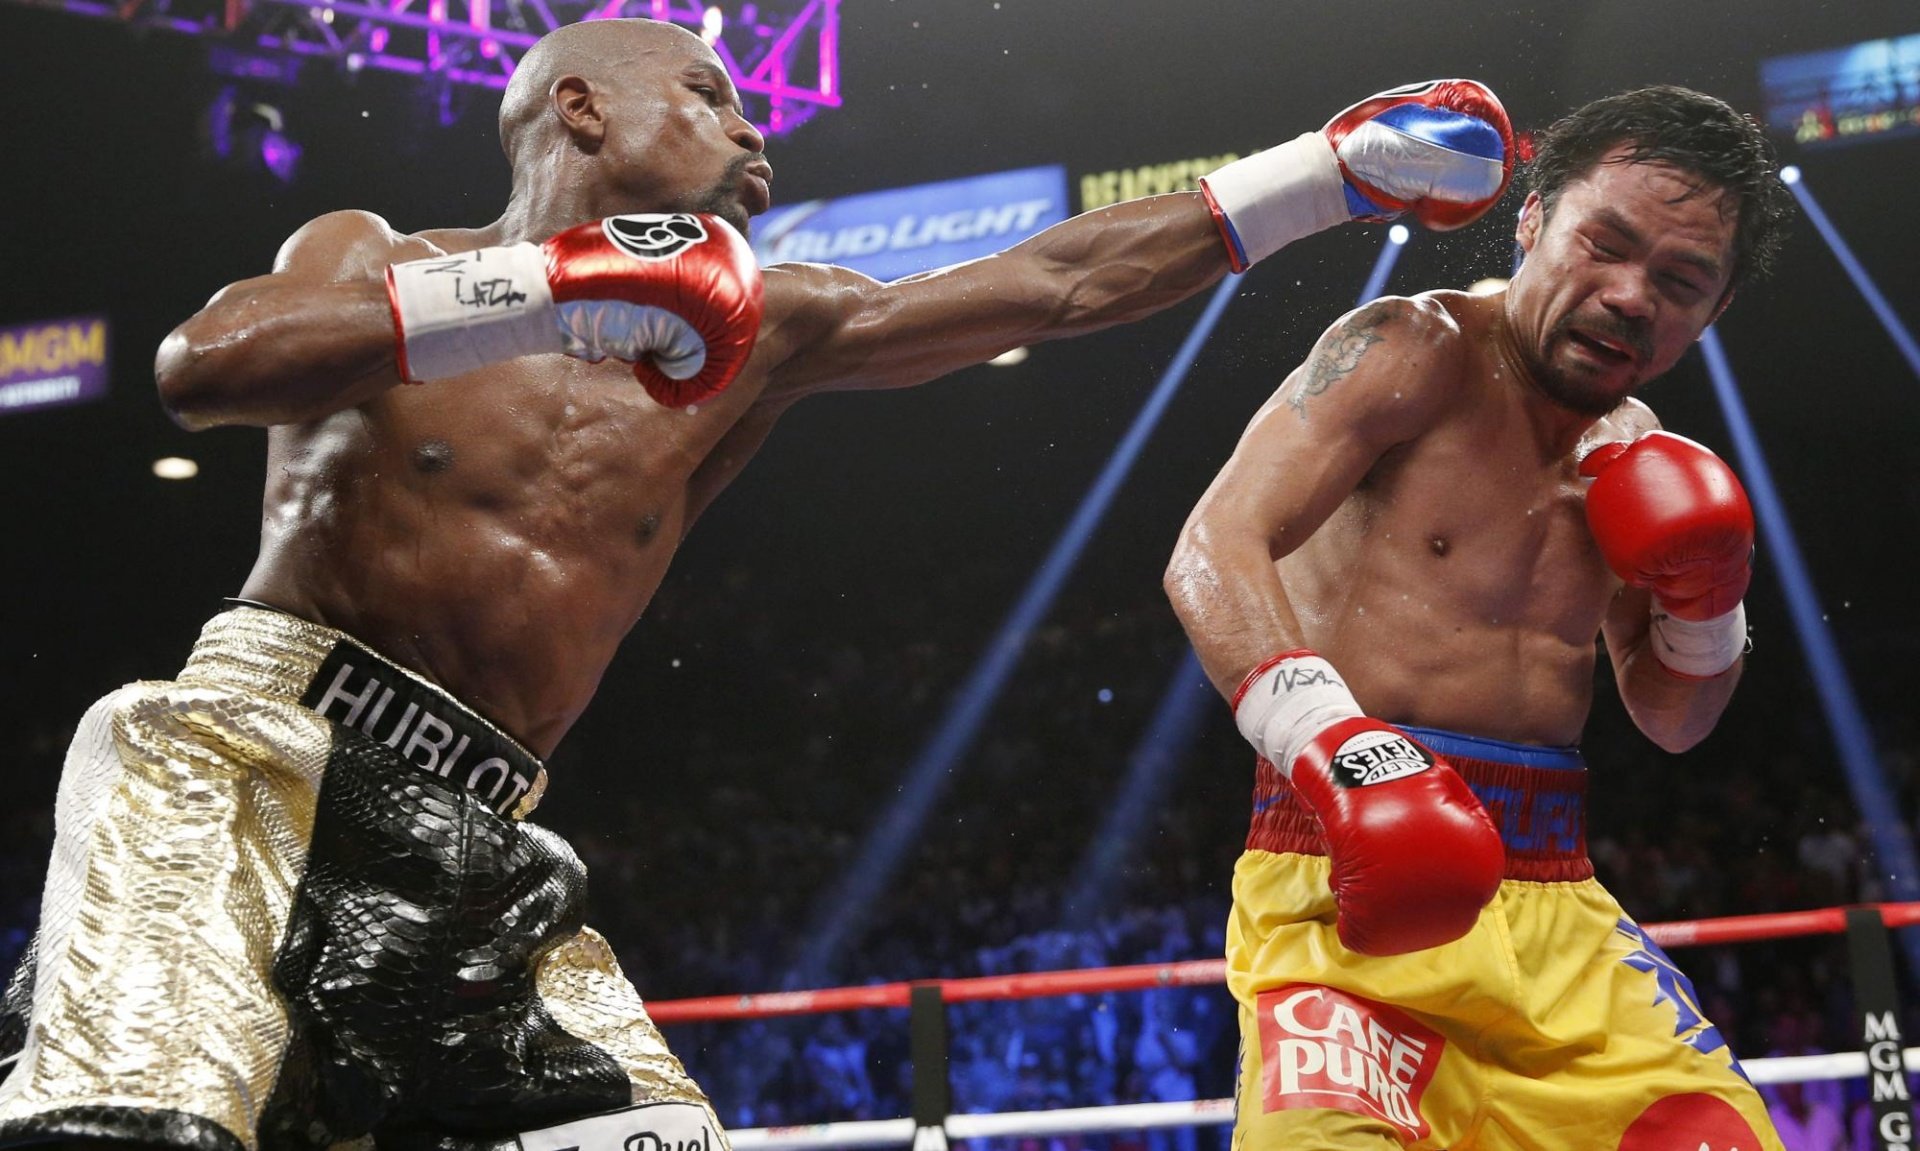 Mayweather-Pacquiao shatters PPV records, could exceed $500m in revenue 